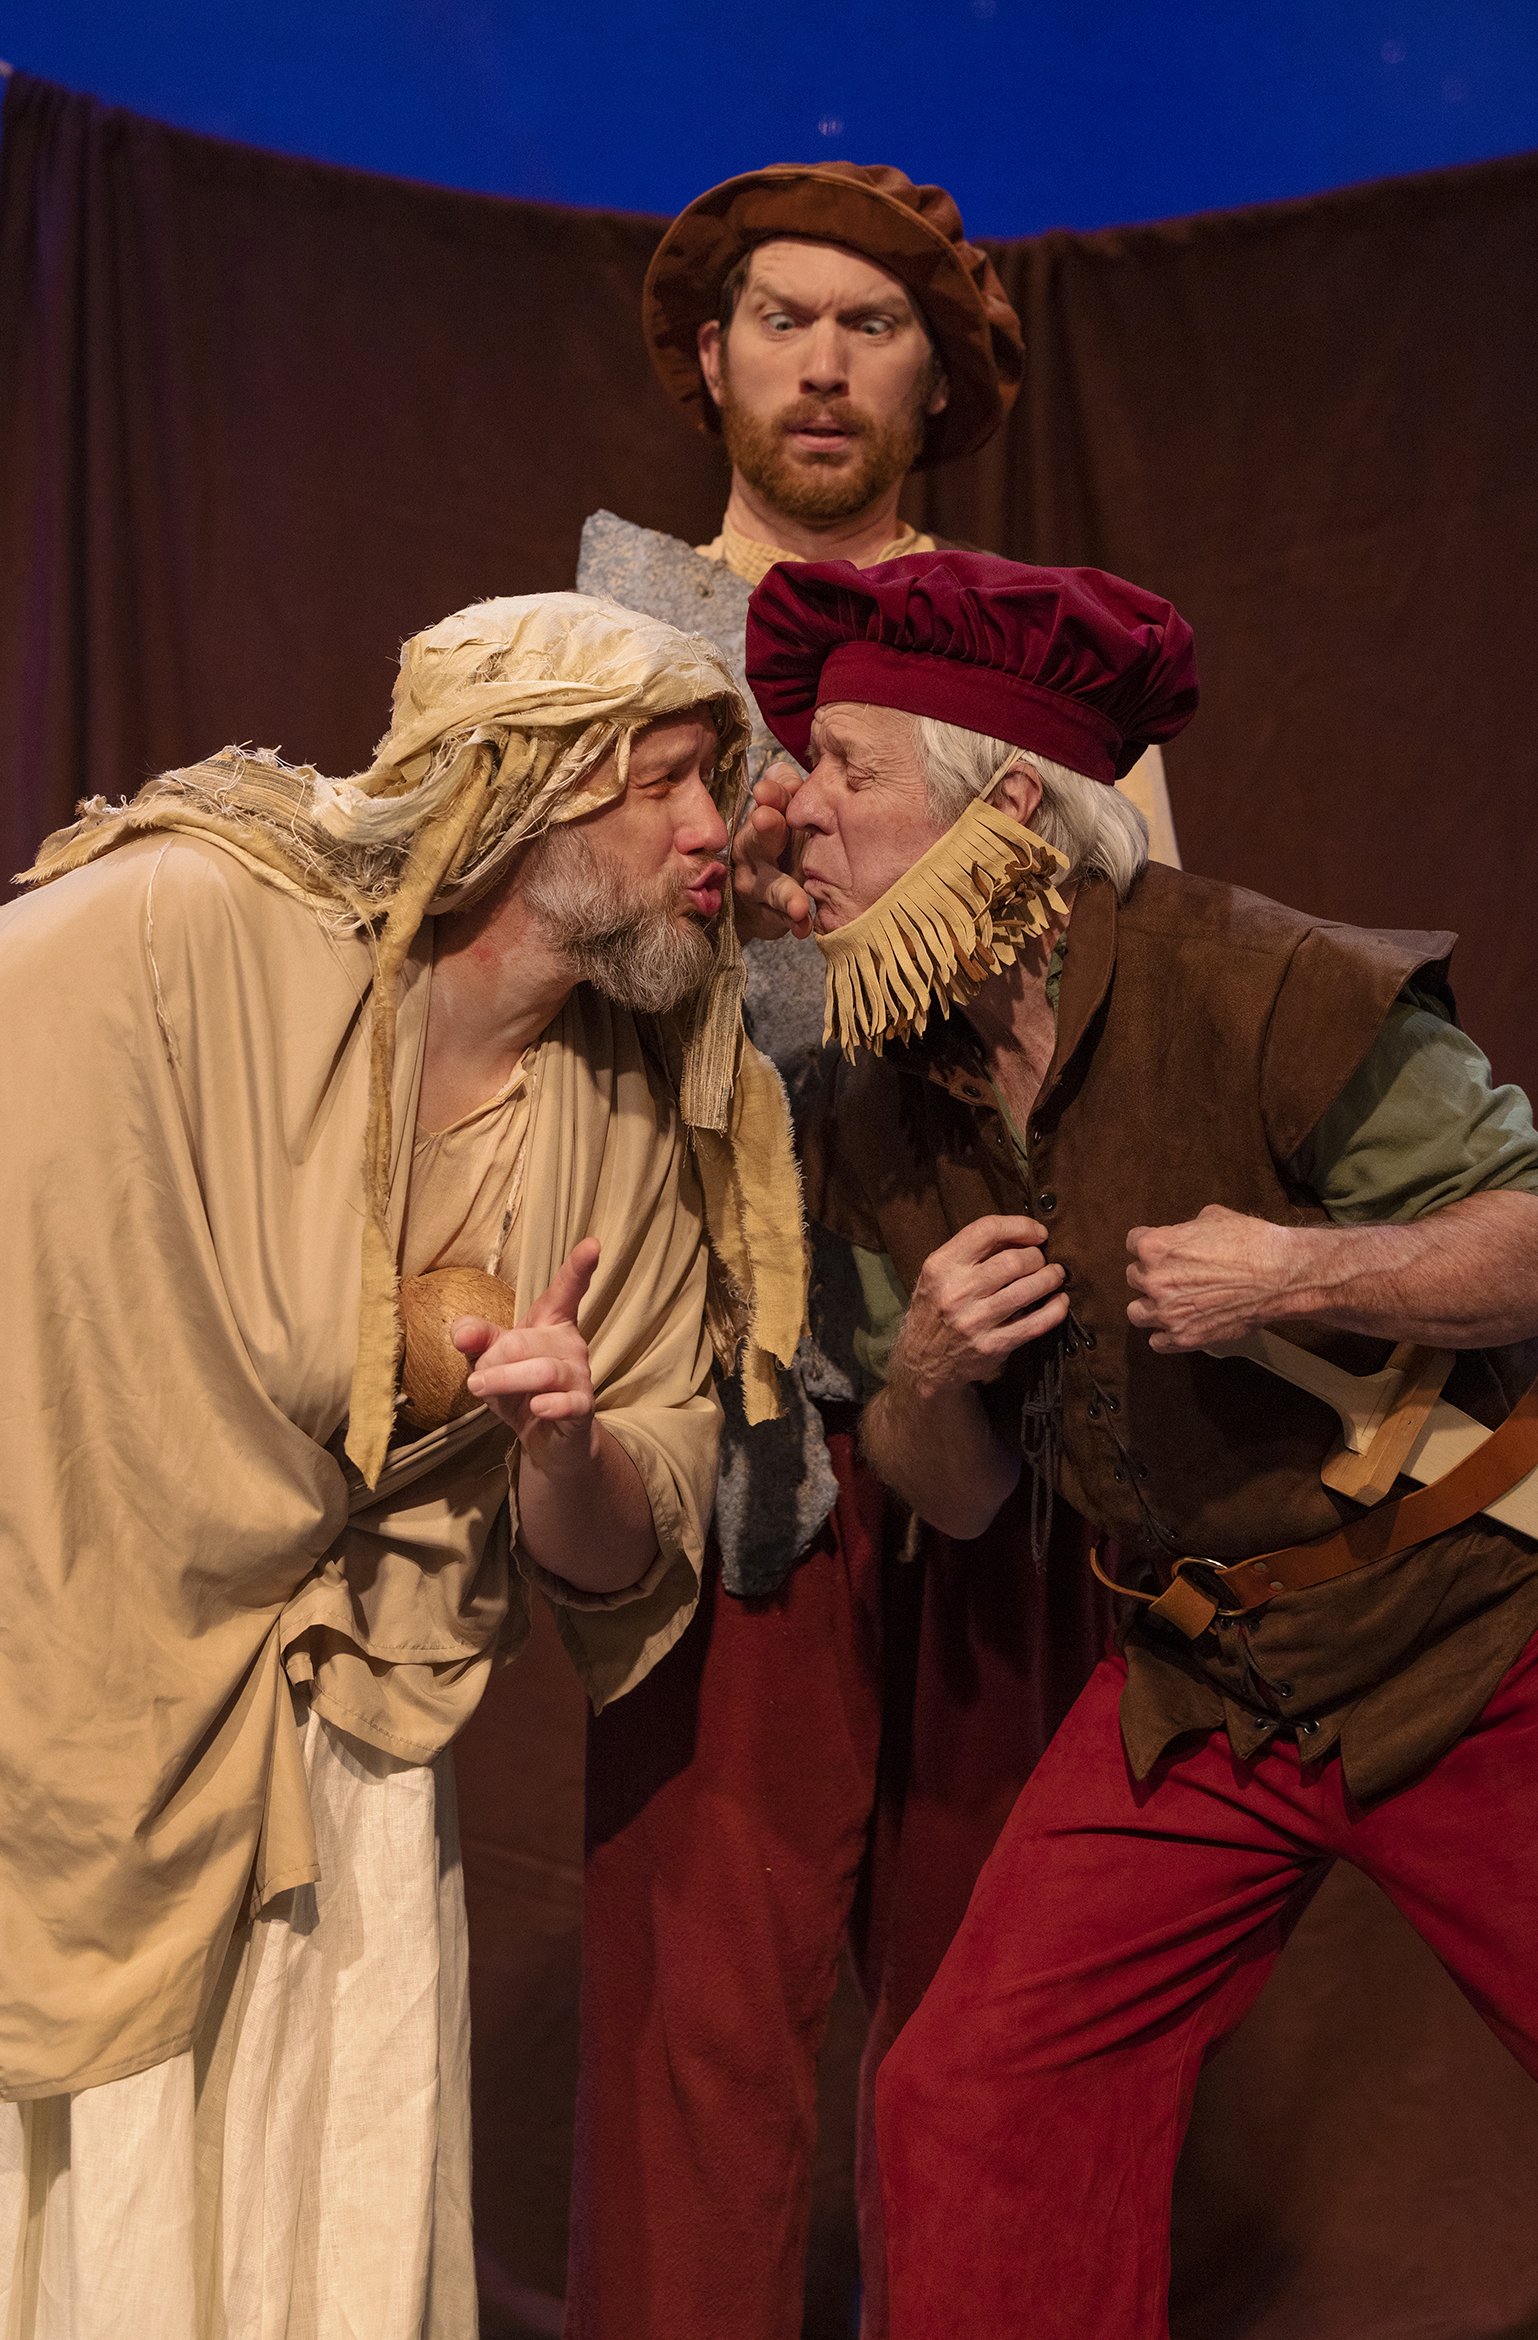 The Most Lamentable Comedy and Most Cruel Death of Pyramus and Thisbe: Matt Walley as Francis Flute, Joseph McGrath as Nick Bottom and Christopher Pankratz as Tom Snout. Photo by Tim Fuller.